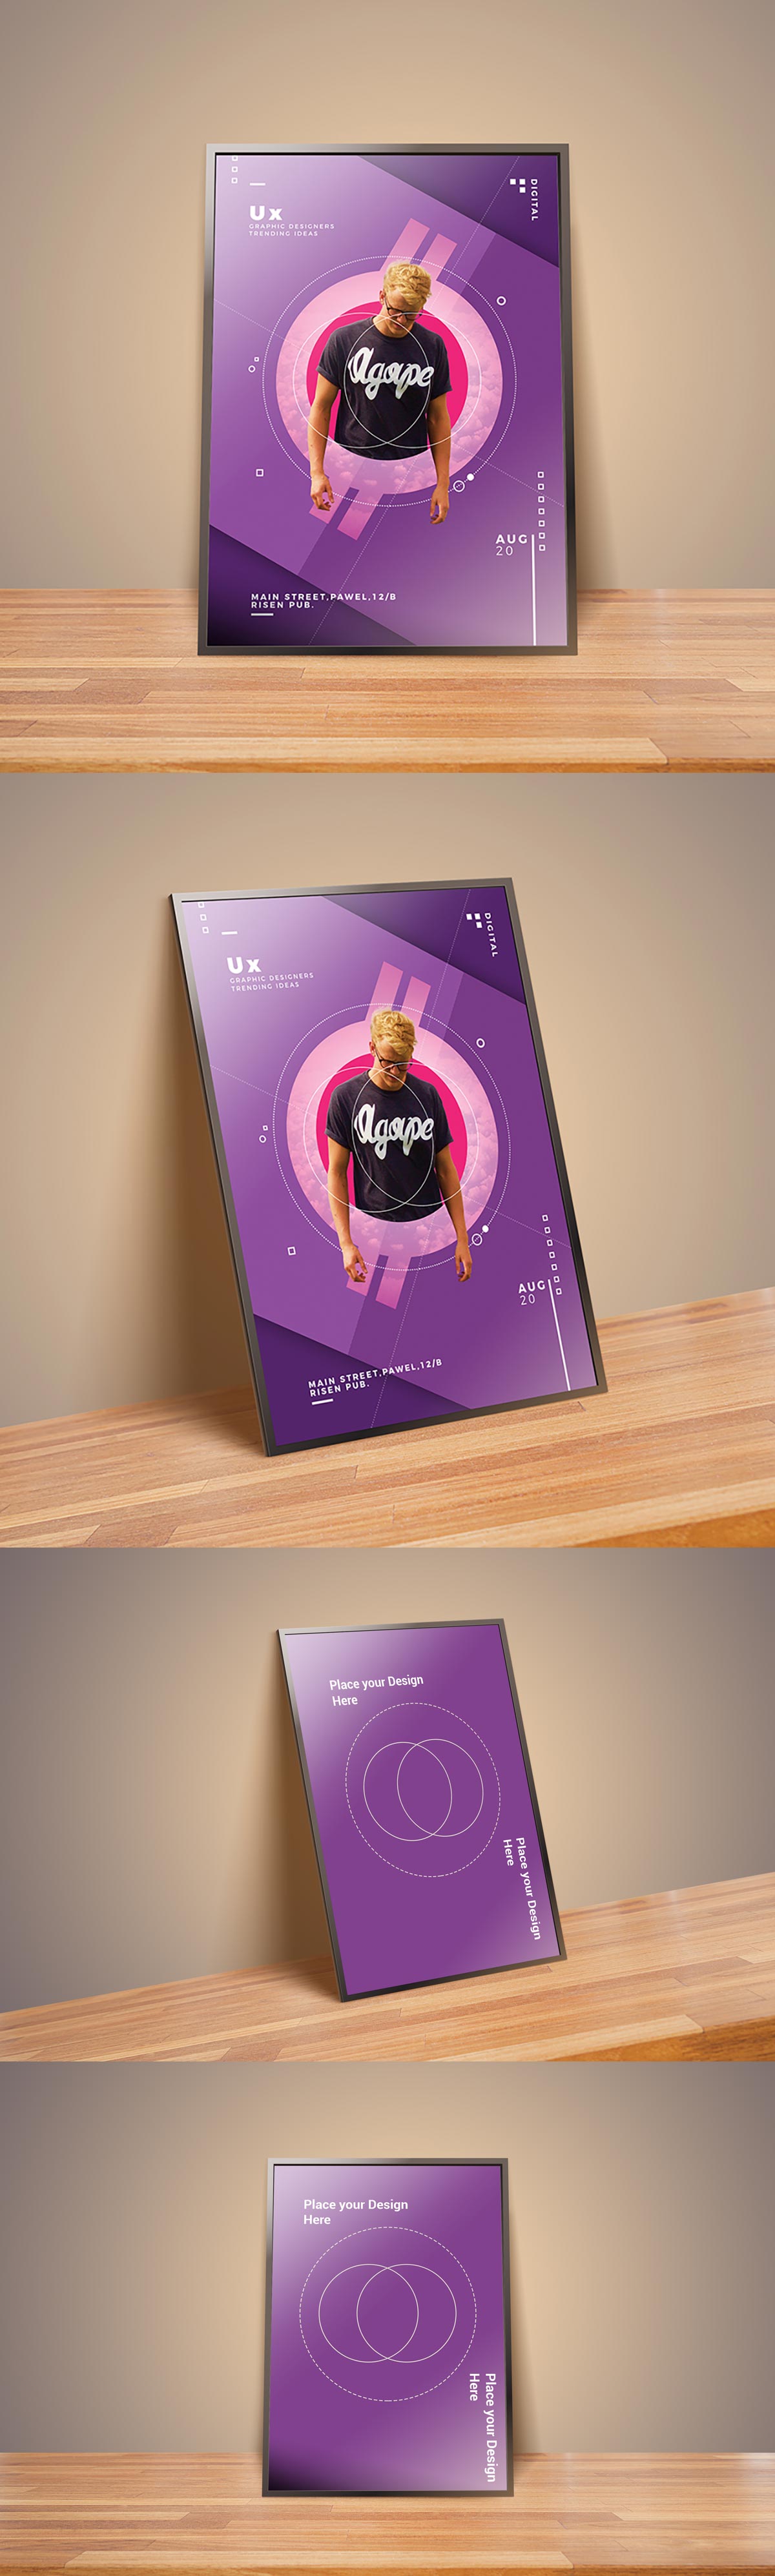 Free Photostatic Picture Frame Mockup